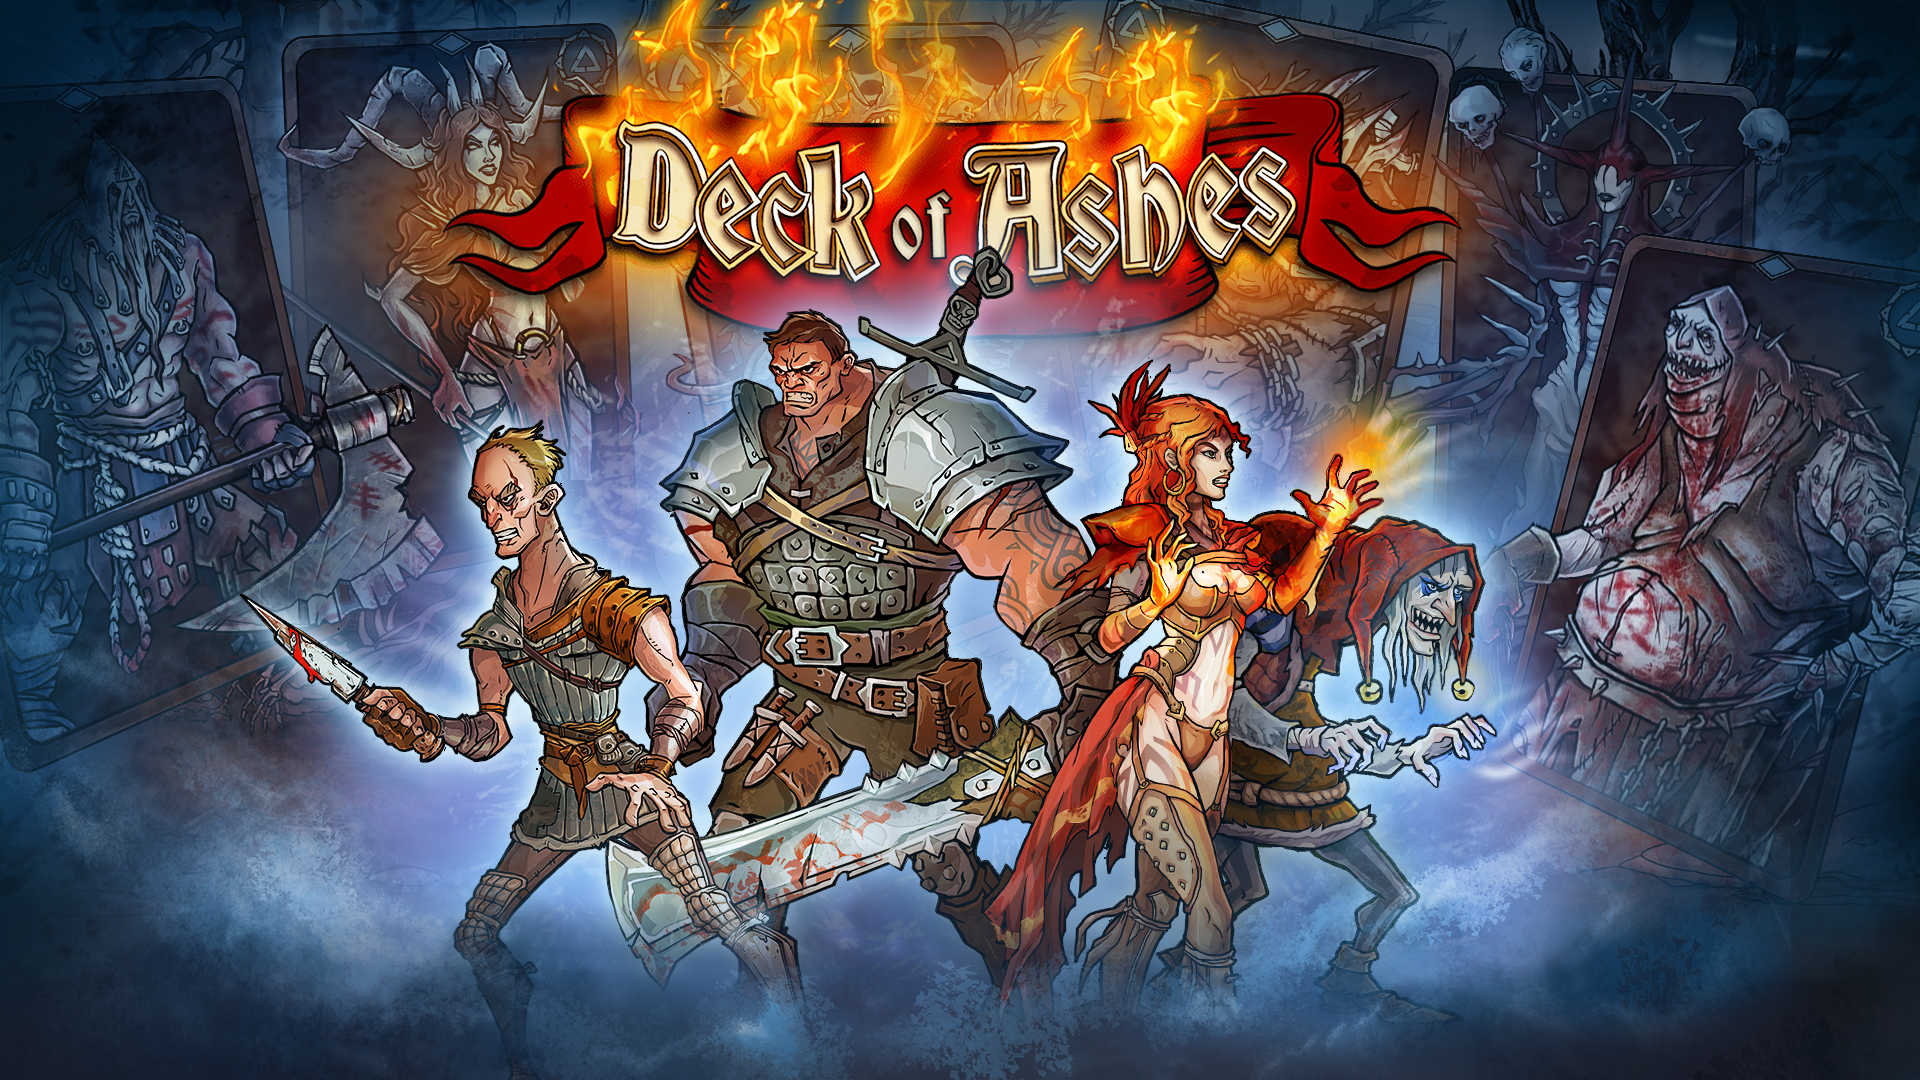 Hawked no pc | singleplayer | deck of ashes: jogo chegará aos pc's | 1ea258f0 image | singleplayer